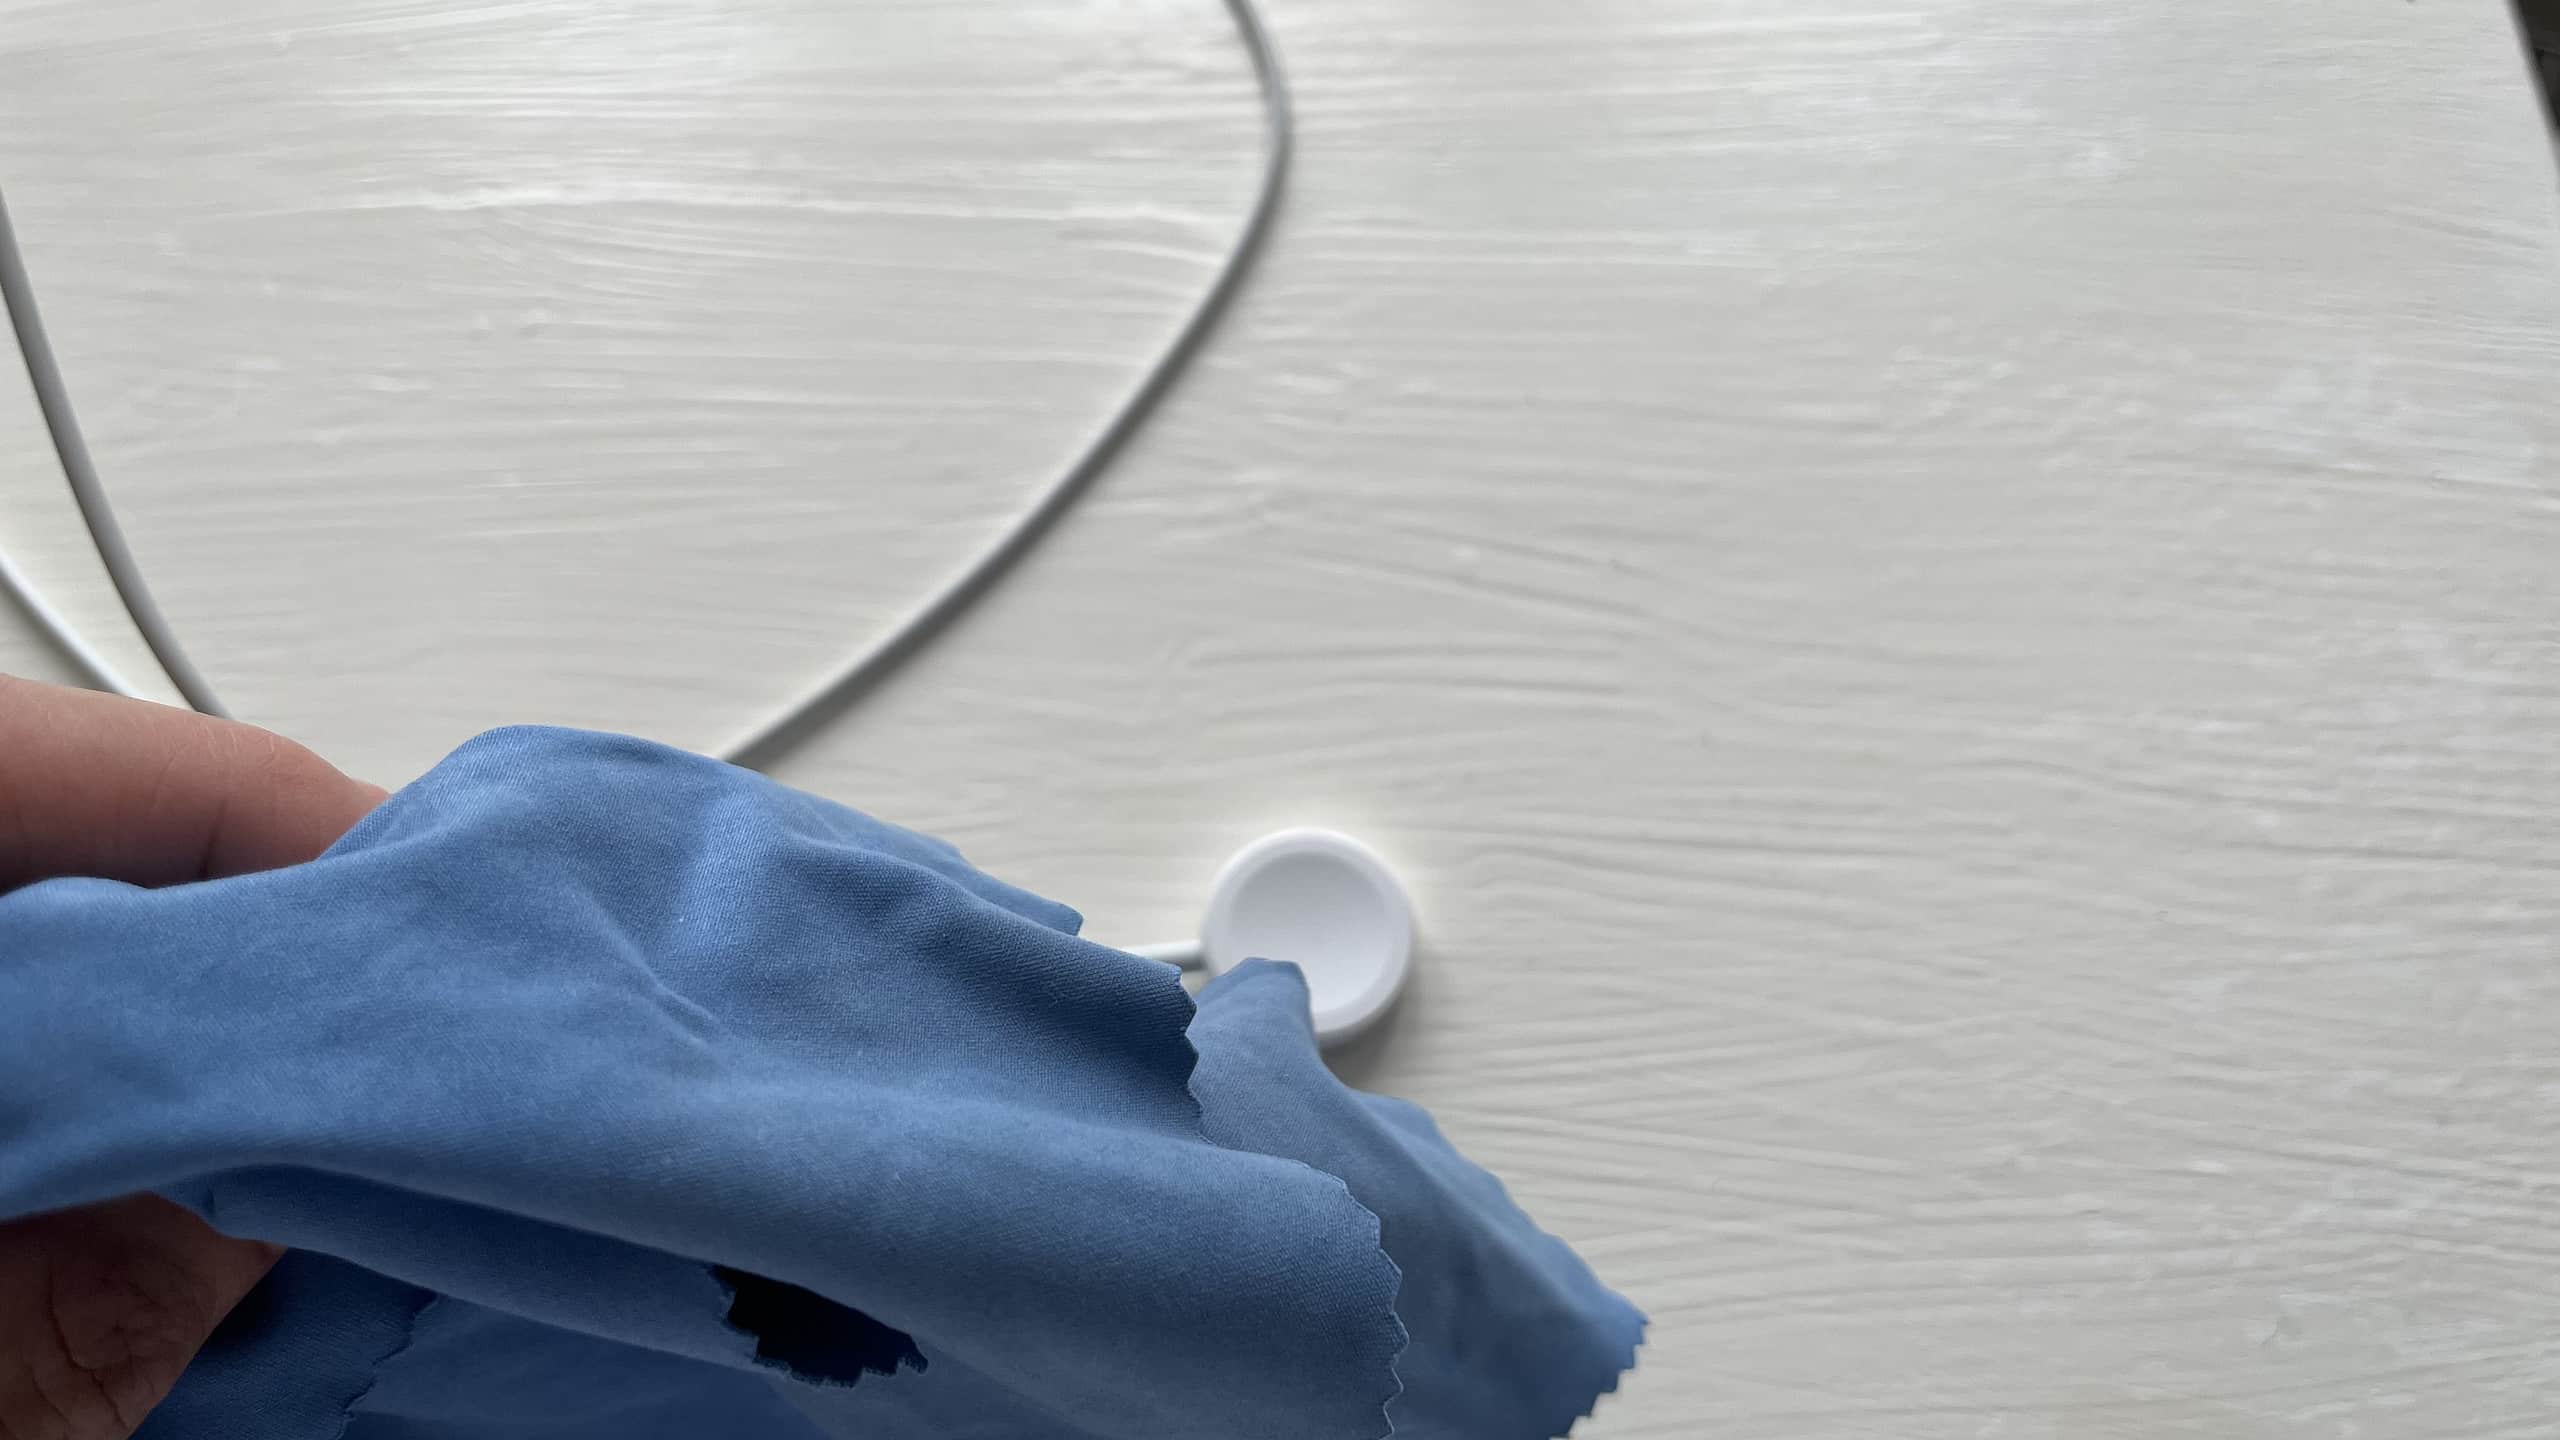 Photo of an Apple Watch charger and a blue microfiber cloth